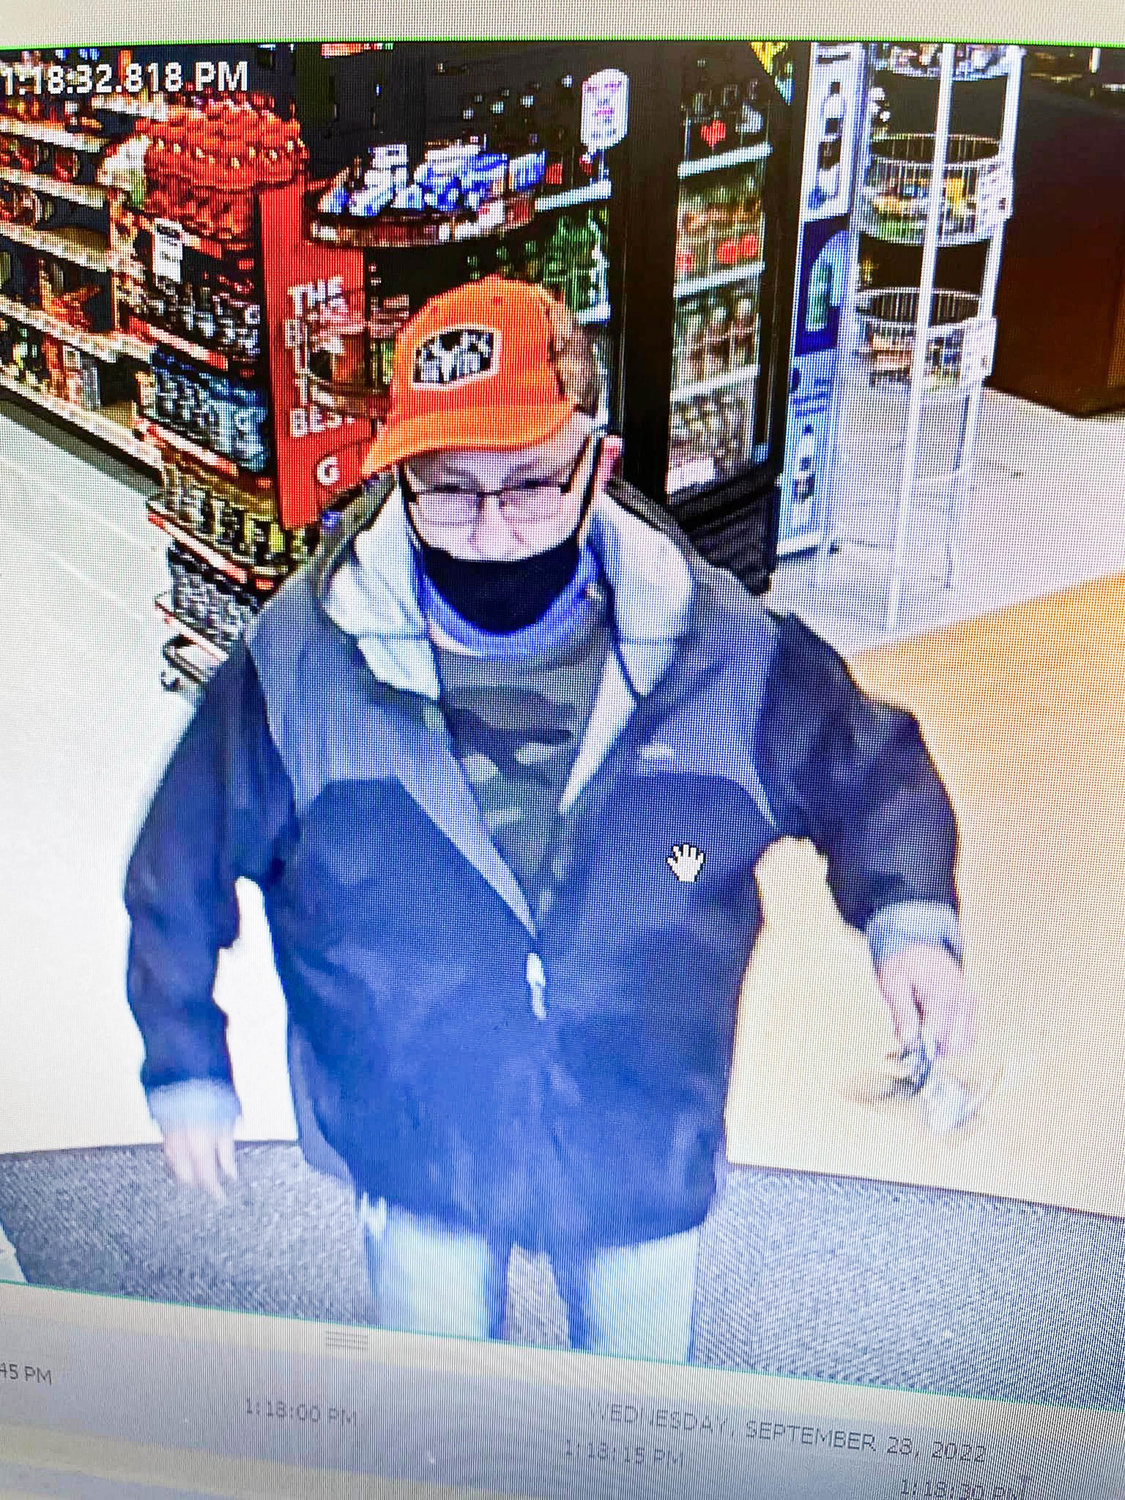 This suspect is wanted as part of a larceny investigation at Kinney Drugs on Oriskany Boulevard in Whitesboro Wednesday afternoon. Anyone who recognizes him is asked to call the Whitesboro Police Department at 315-736-1944.